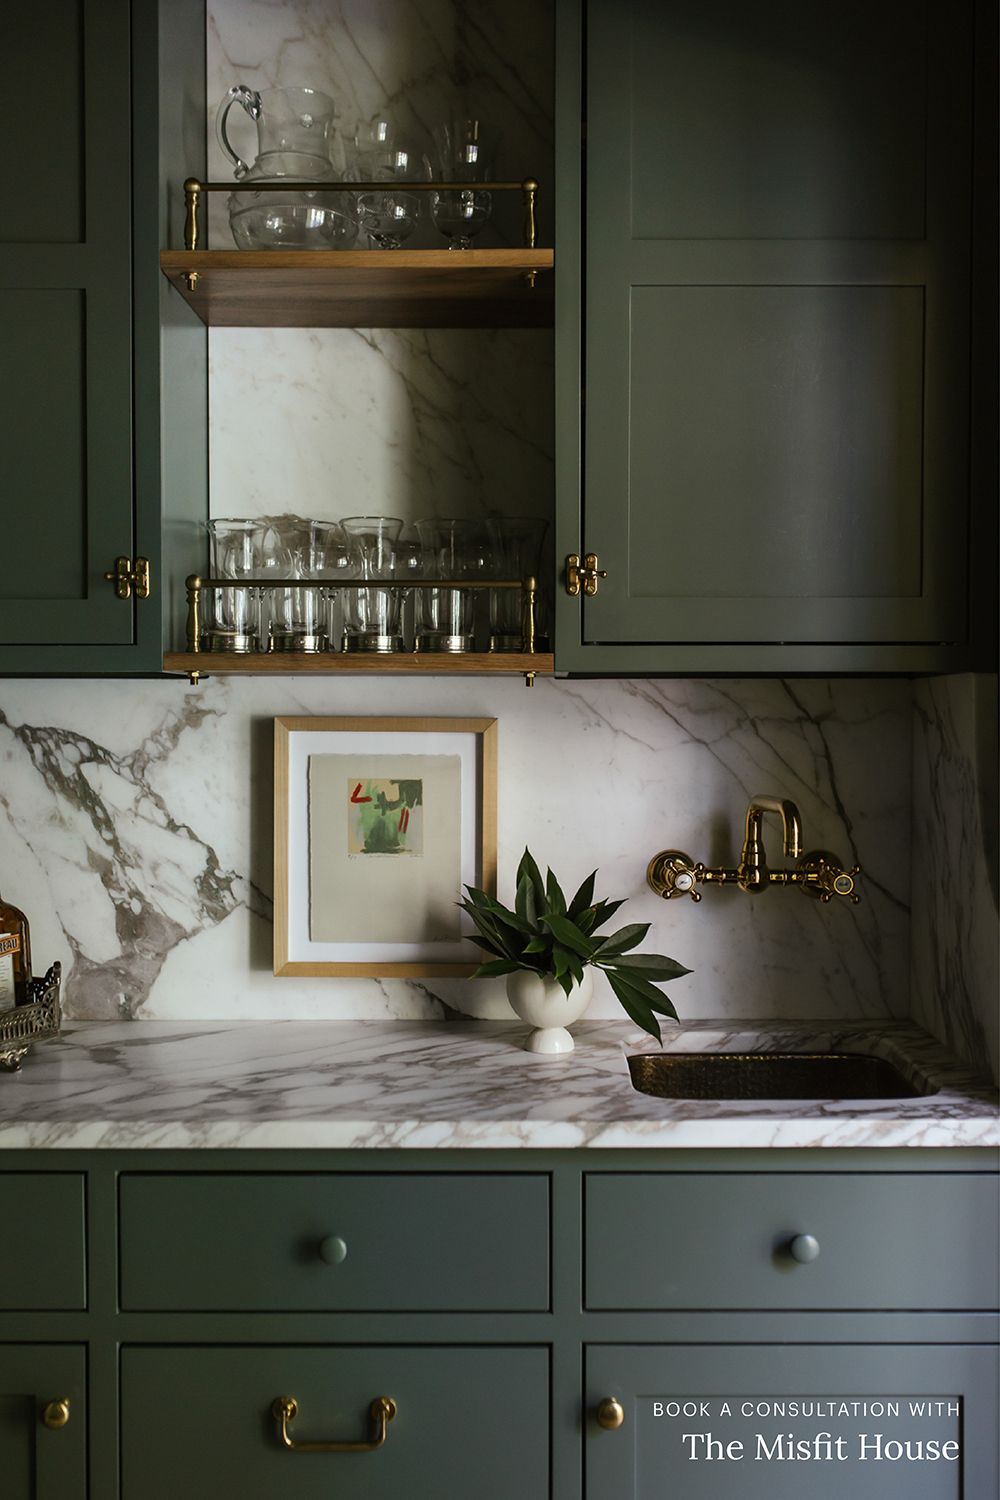 Sink Cabinets Bring Modern Ideas to Home